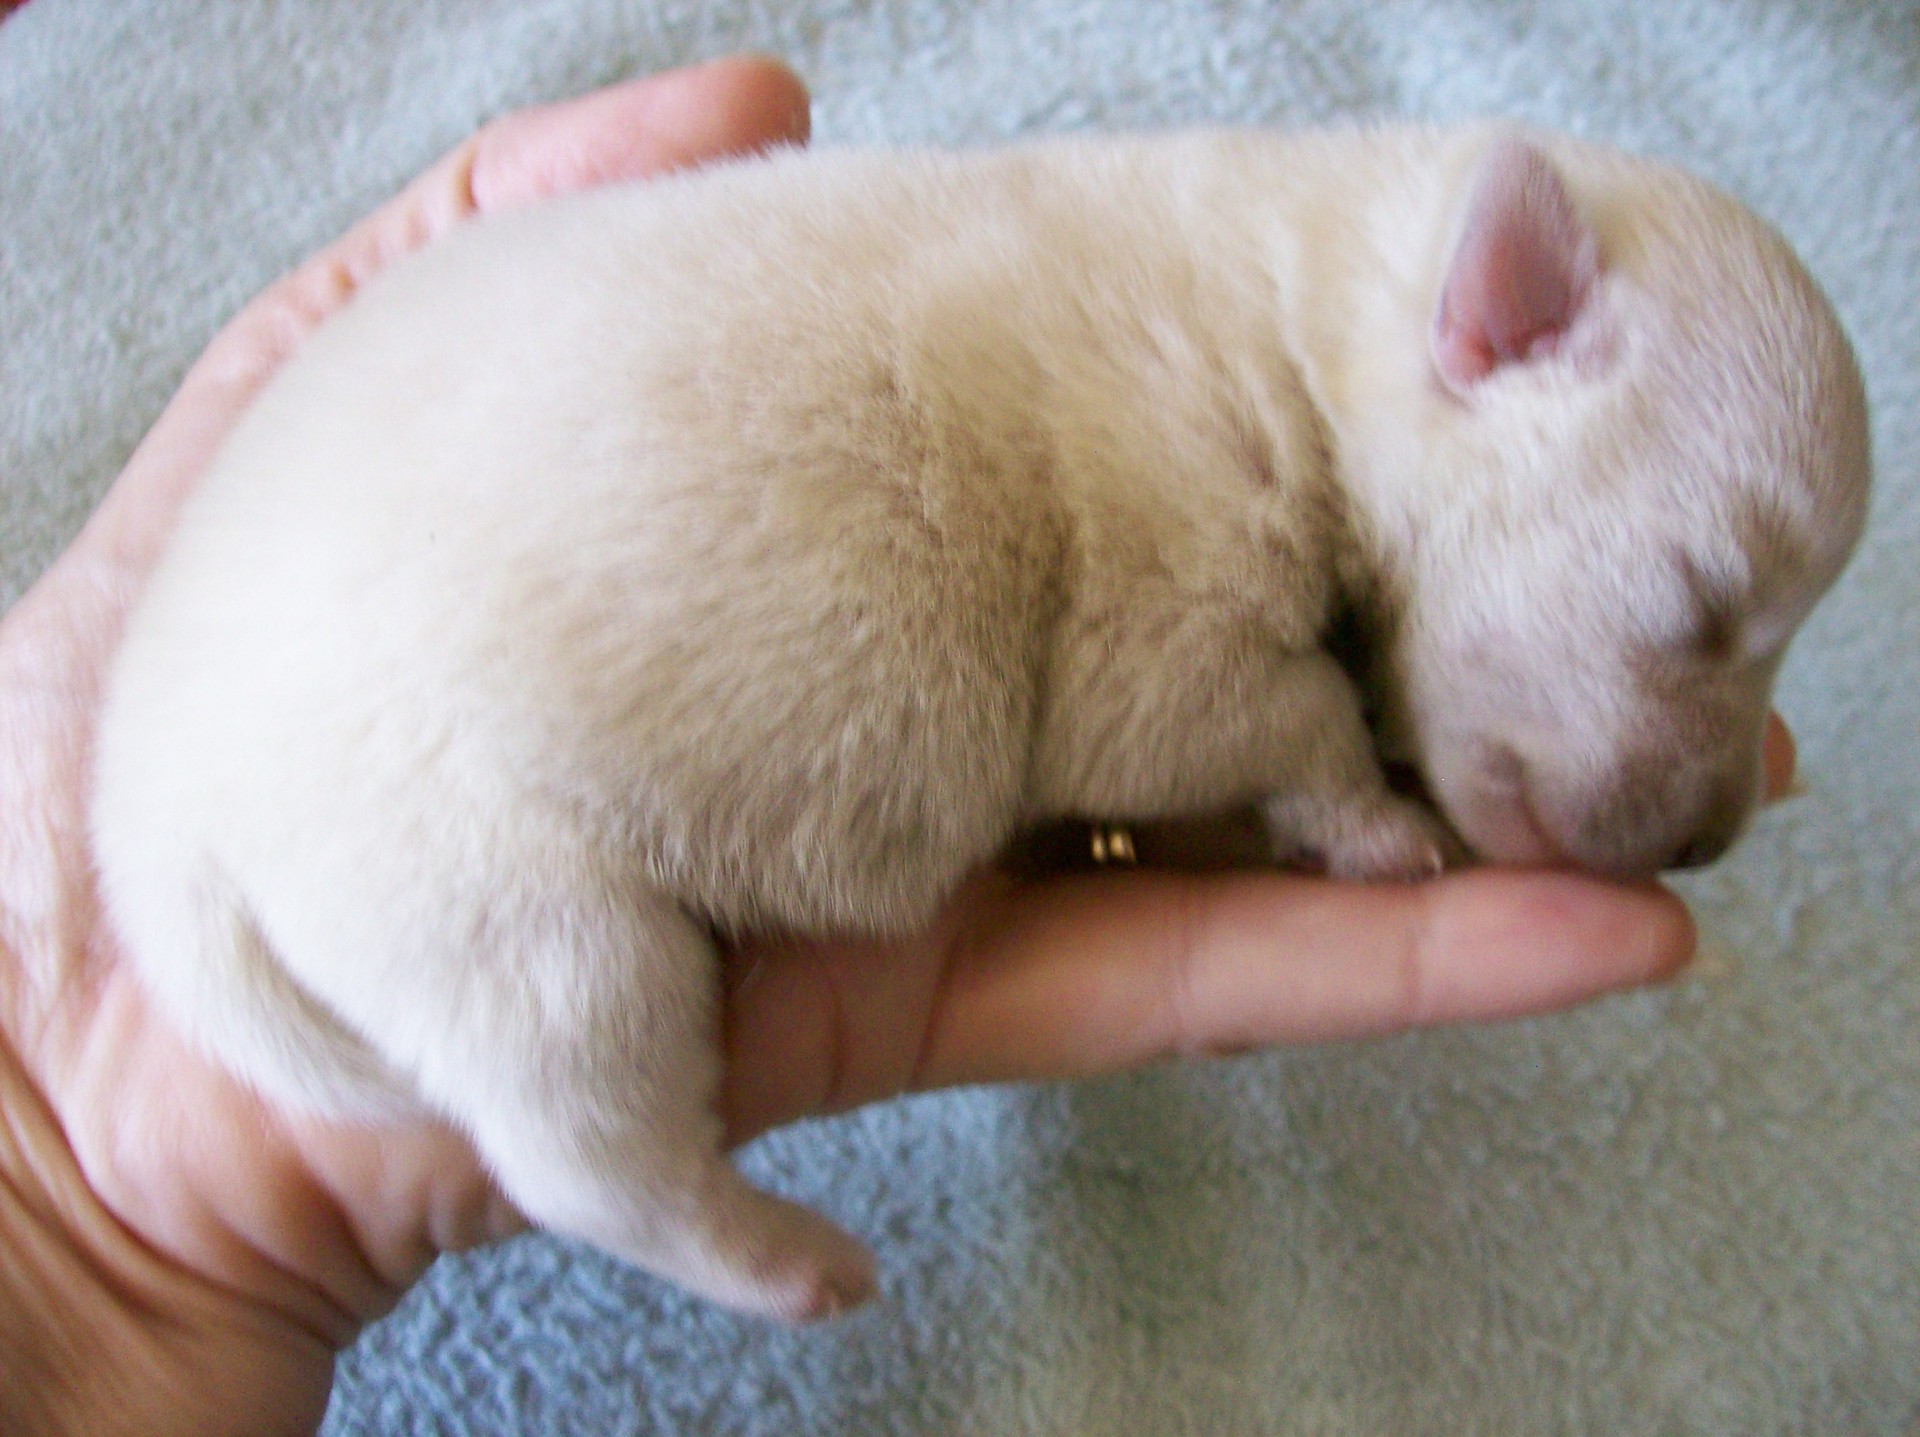 Tiny Puppy In Hand